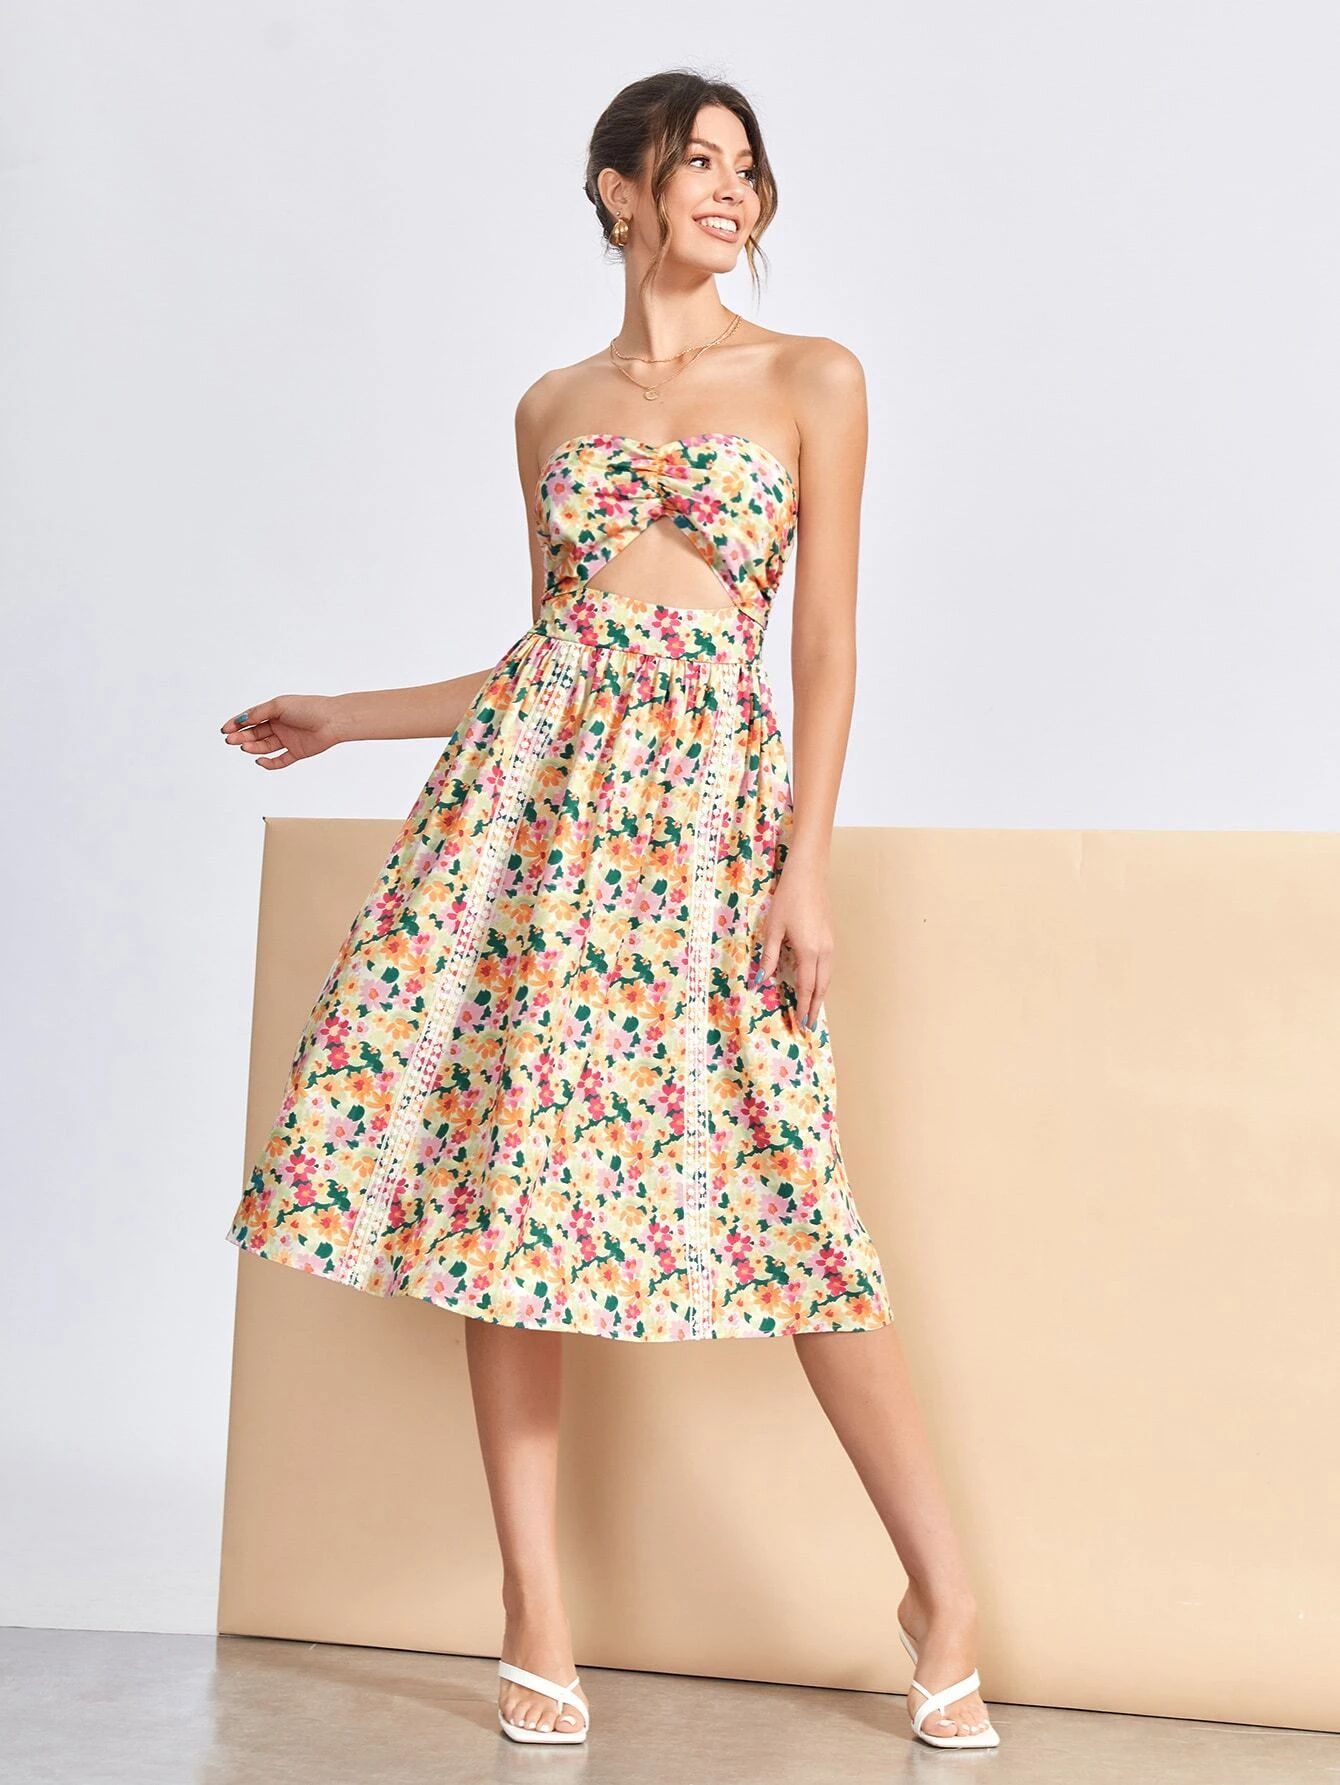 SHEIN X Luisana Batista Floral Print Cut Out Ruched Guipure Lace Panel Tube Dress
   SKU: sw22022... | SHEIN